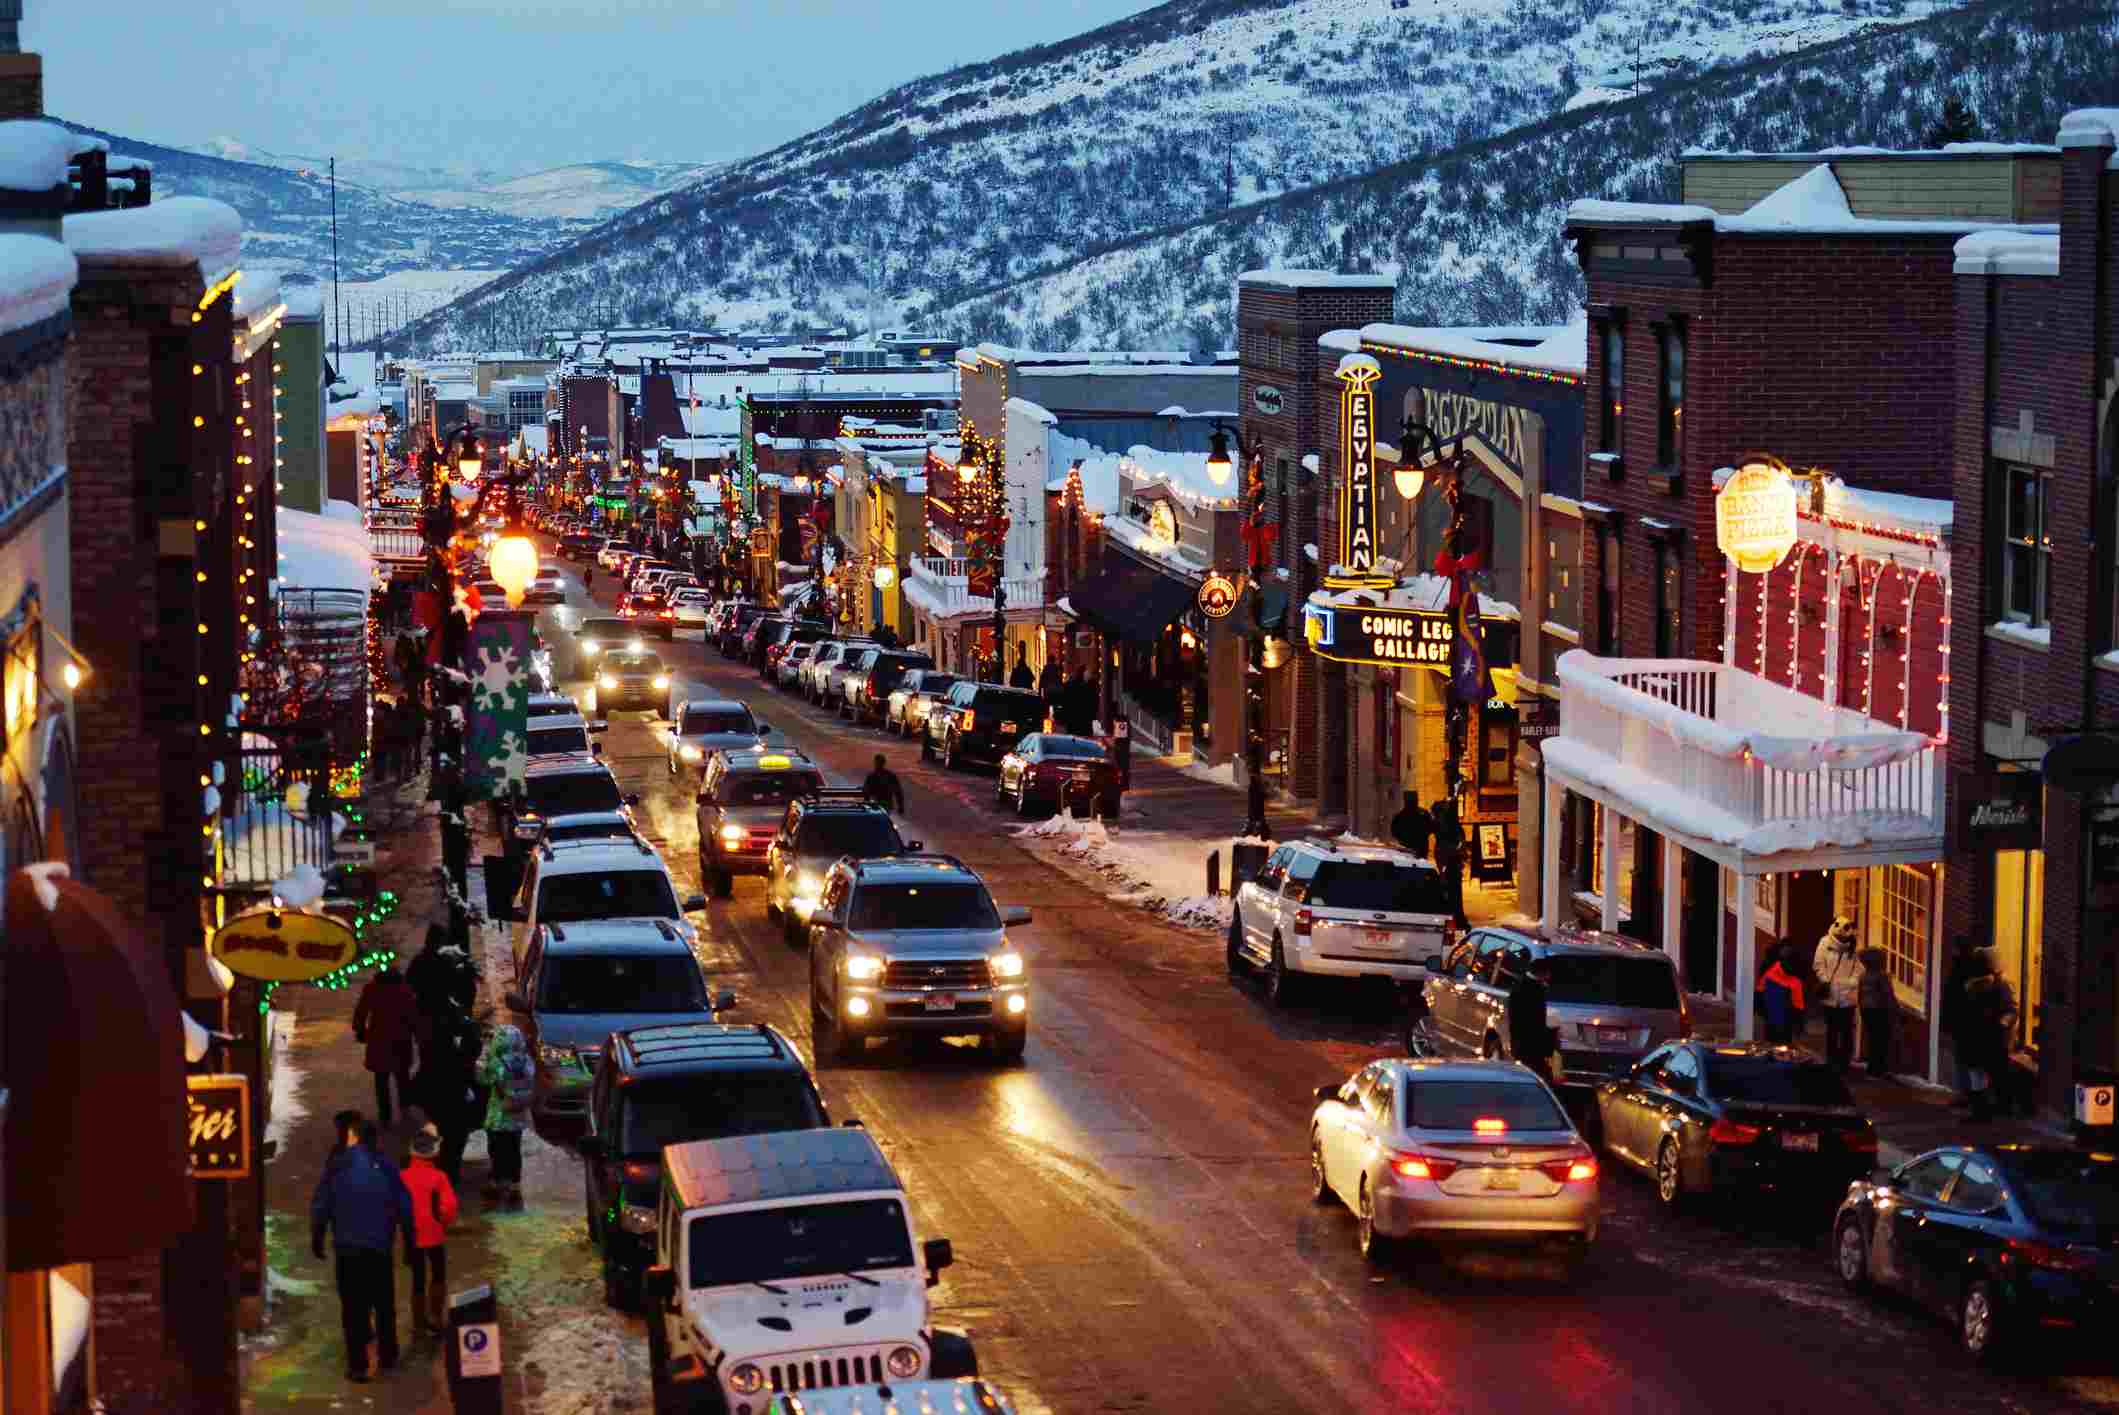 What to Do in Park City if You Don’t Ski All Seasons Adventures